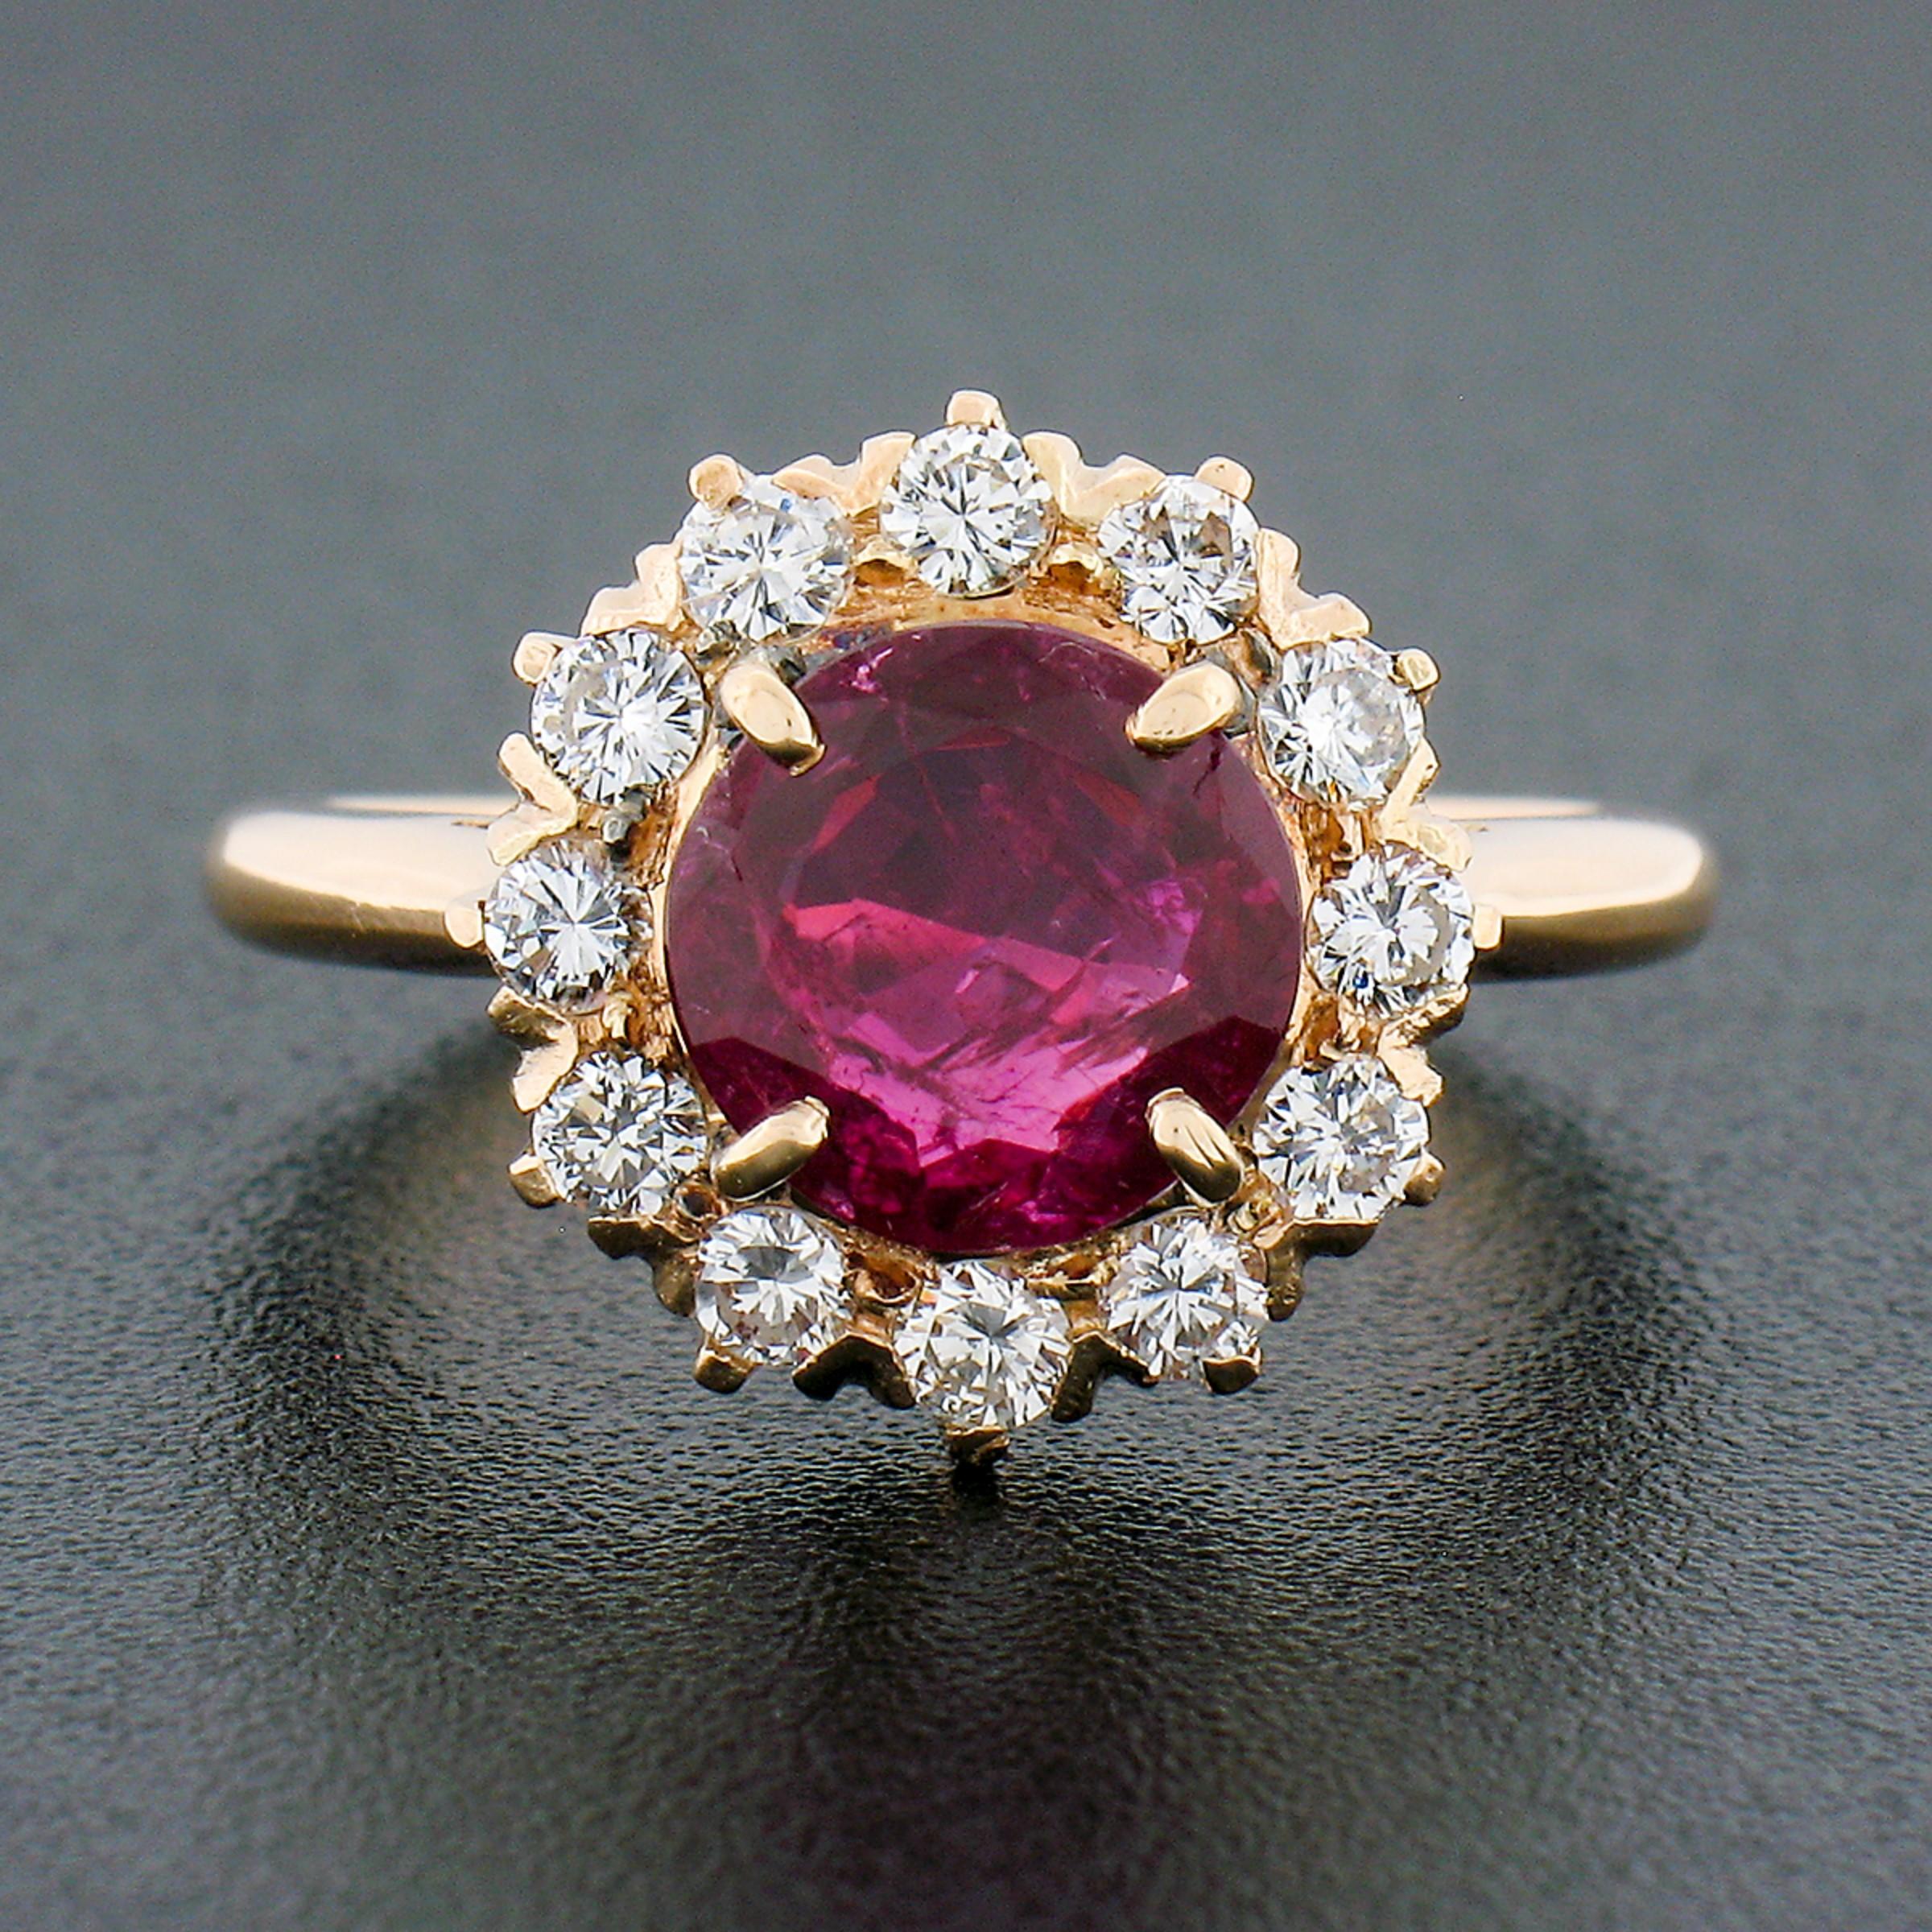 You are looking at an absolutely stunning vintage ring crafted in solid 18k yellow gold featuring an elegant flower cluster style with a gorgeous ruby stone neatly prong set at the center of the brilliant diamond halo. The magnificent ruby has been